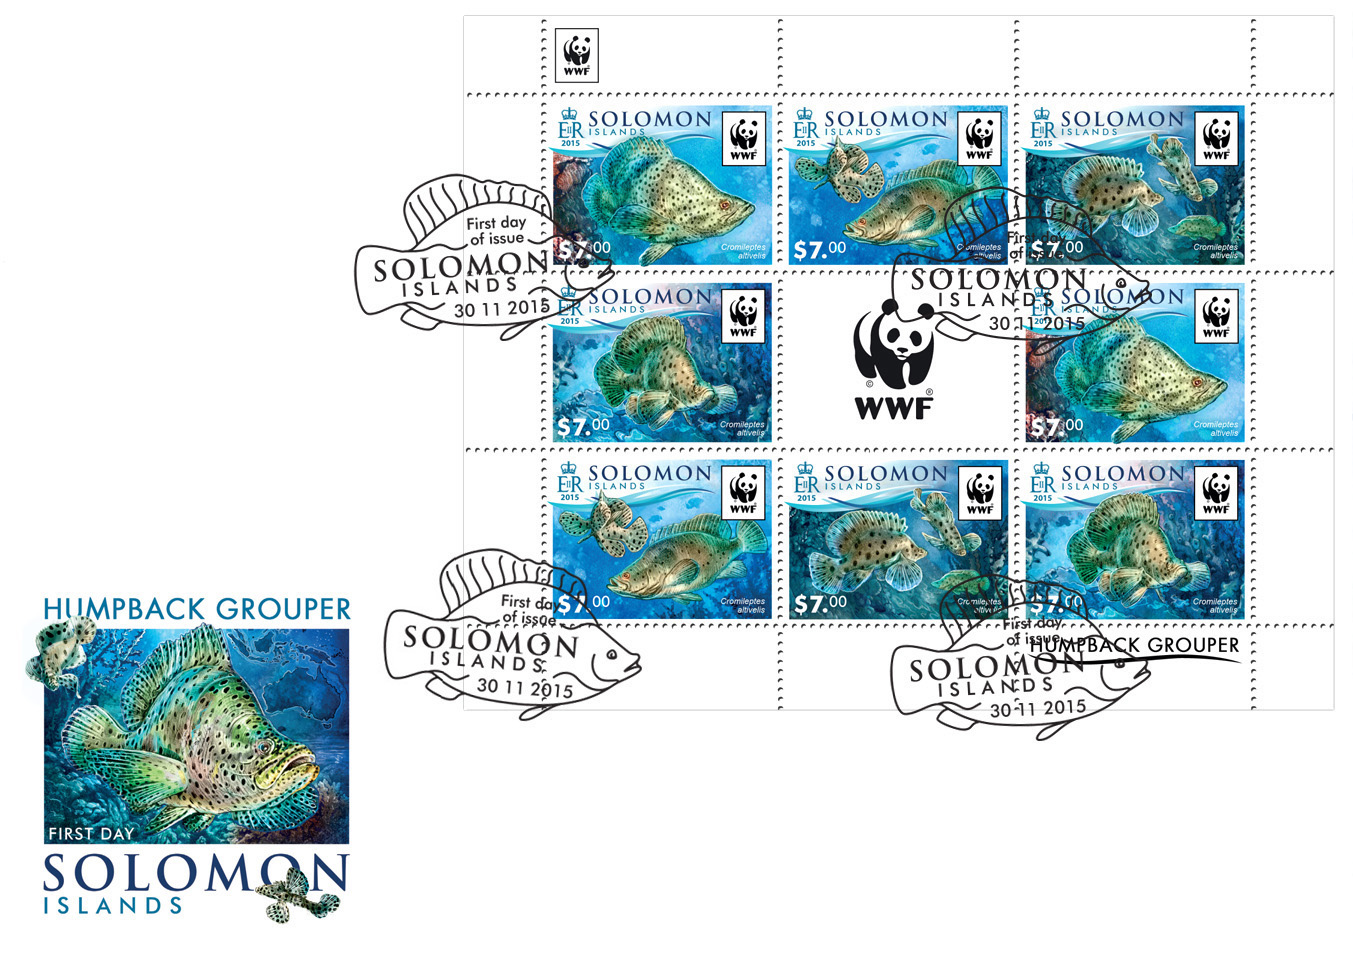 WWF – Fish (FDC) - Issue of Solomon islands postage stamps